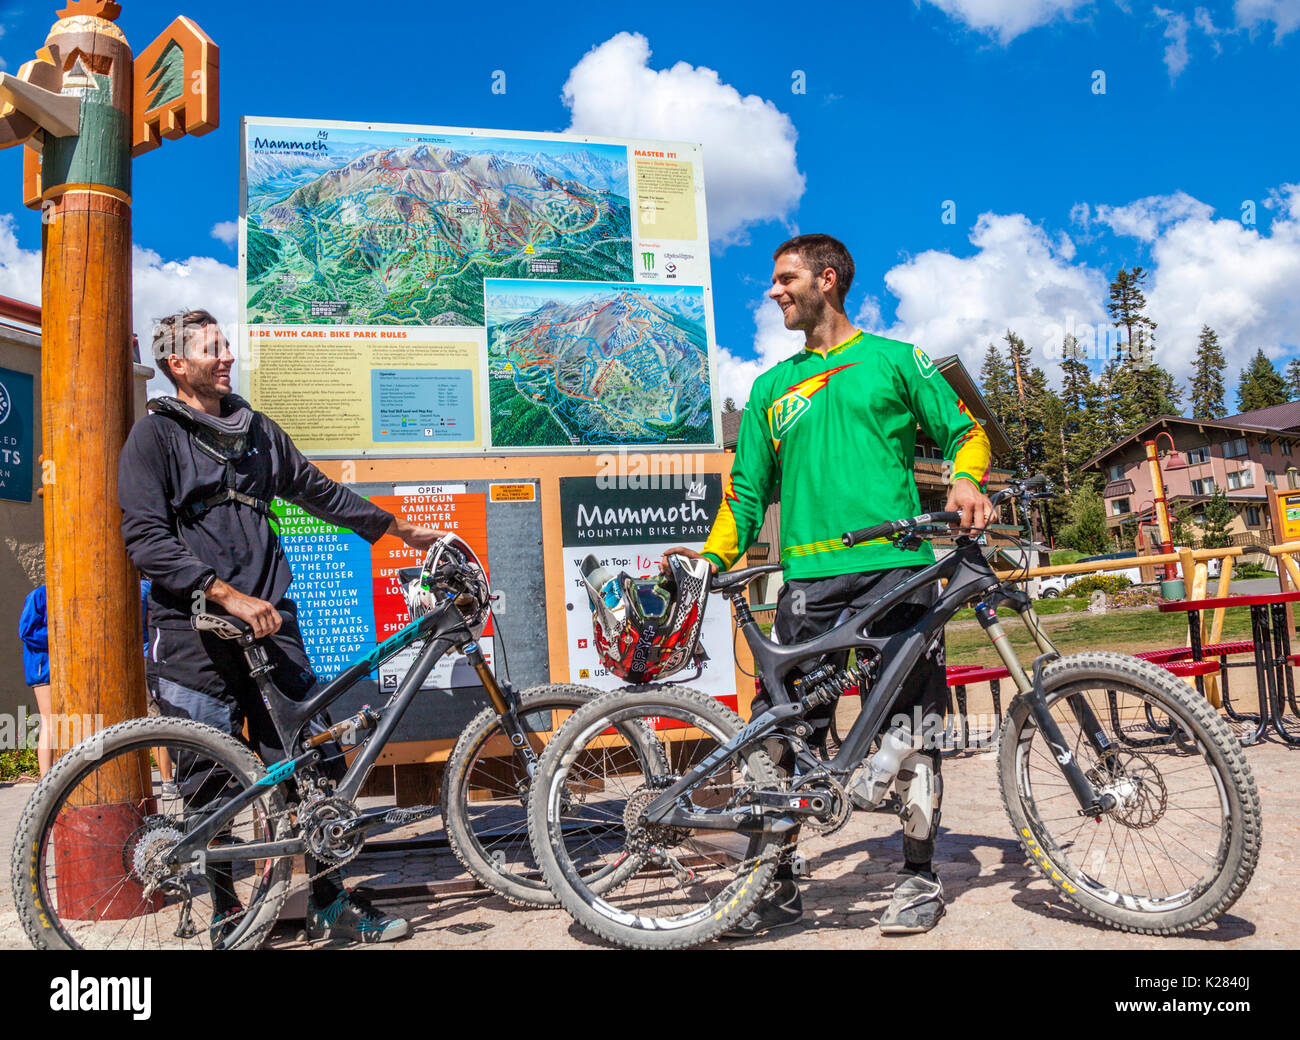 Friends with mountain bikes near sign with trail map by the Adventure Center at Mammoth Mountain in Mammoth Lakes, California Stock Photo